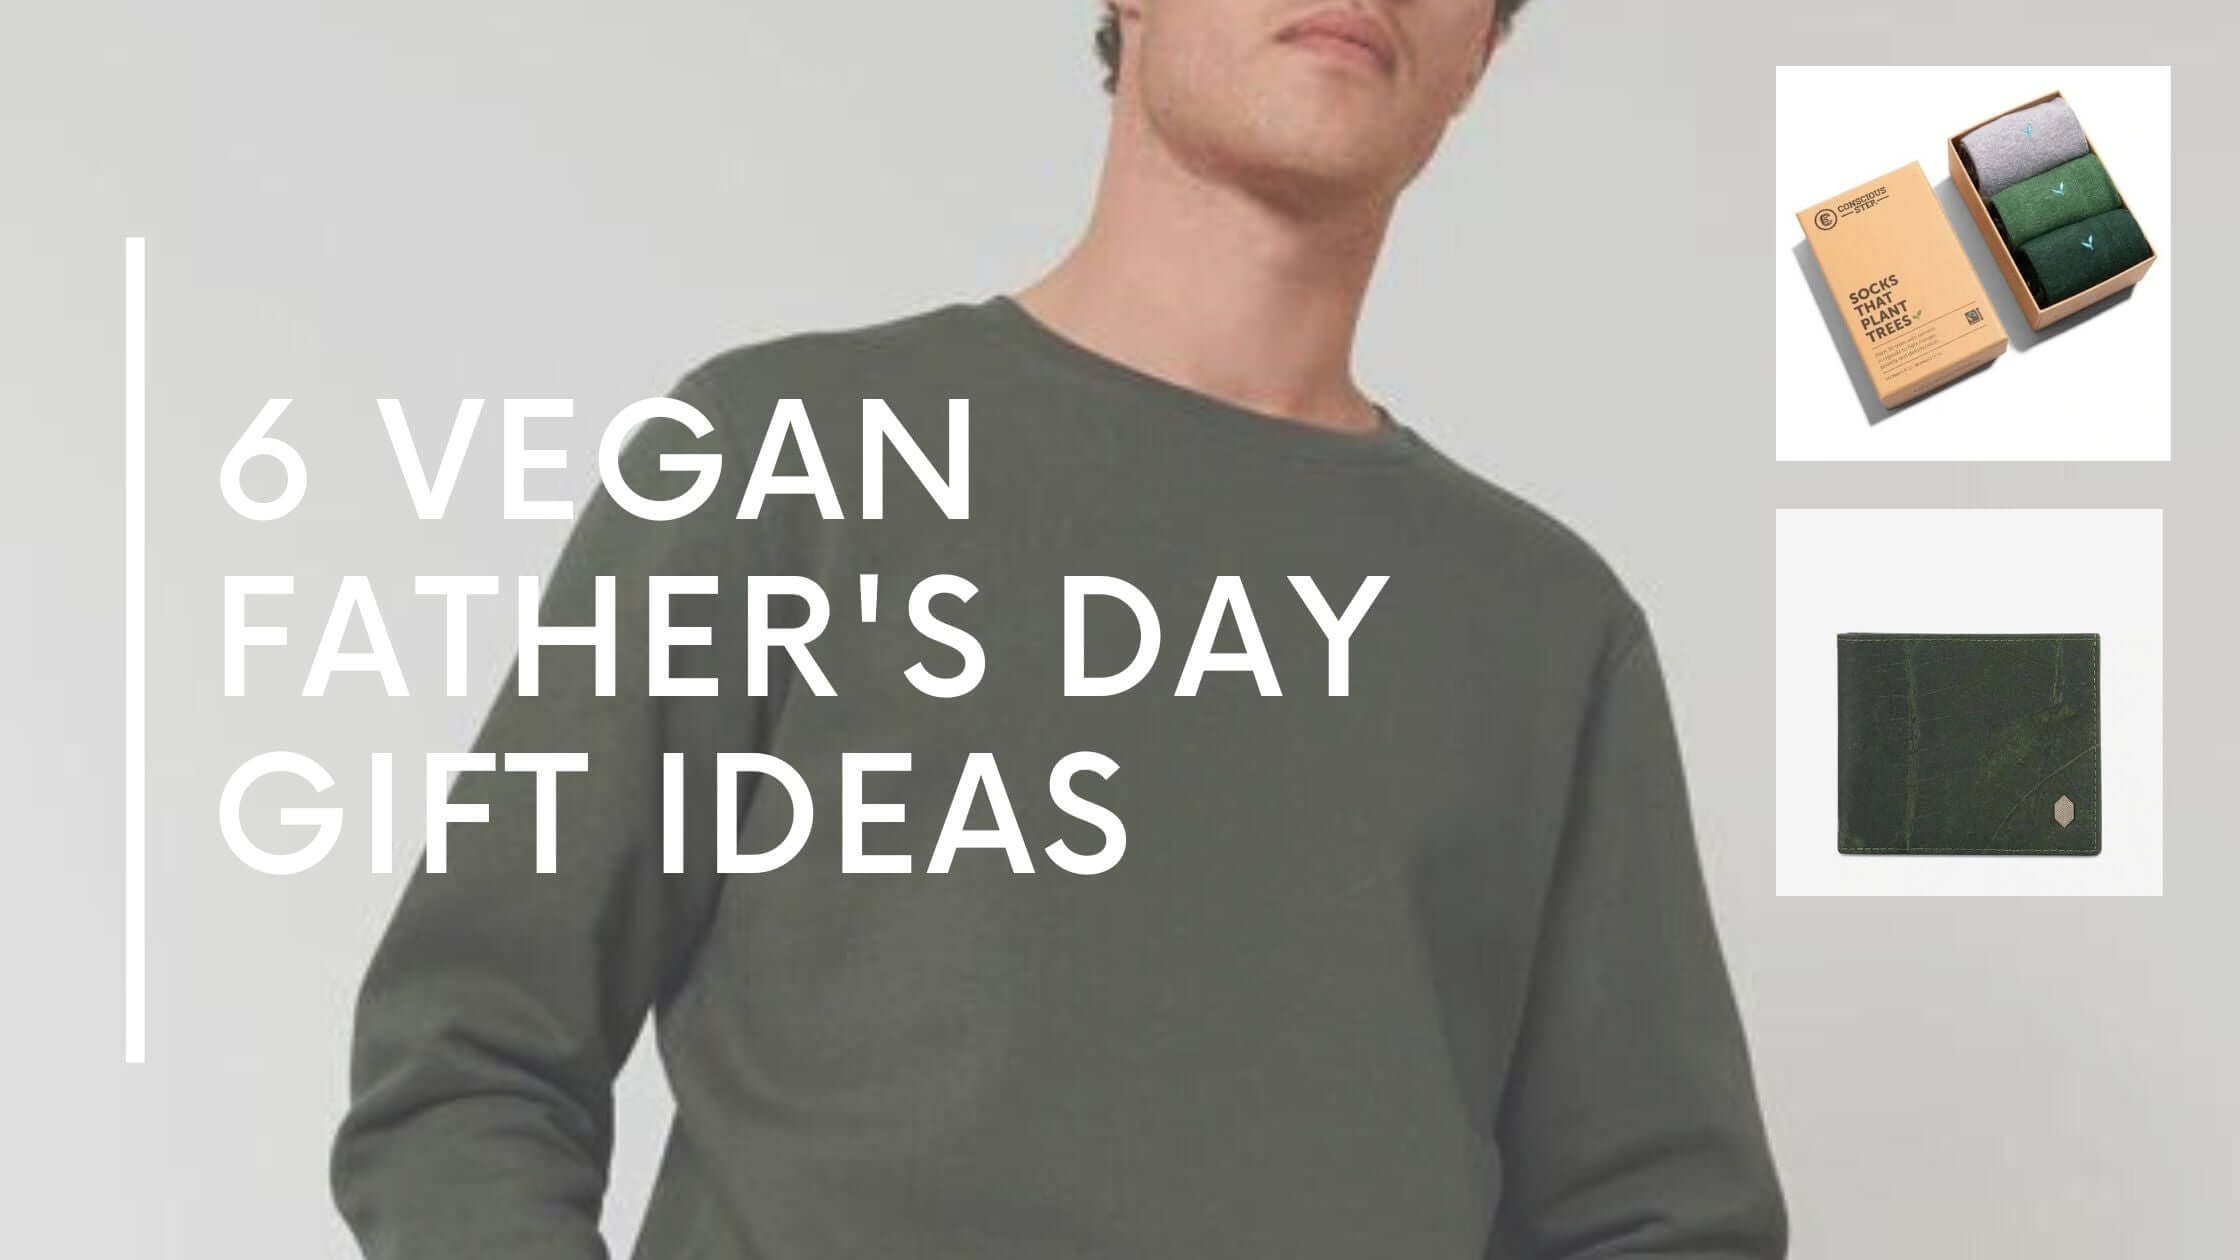 6 Vegan Father's Day Gift Ideas